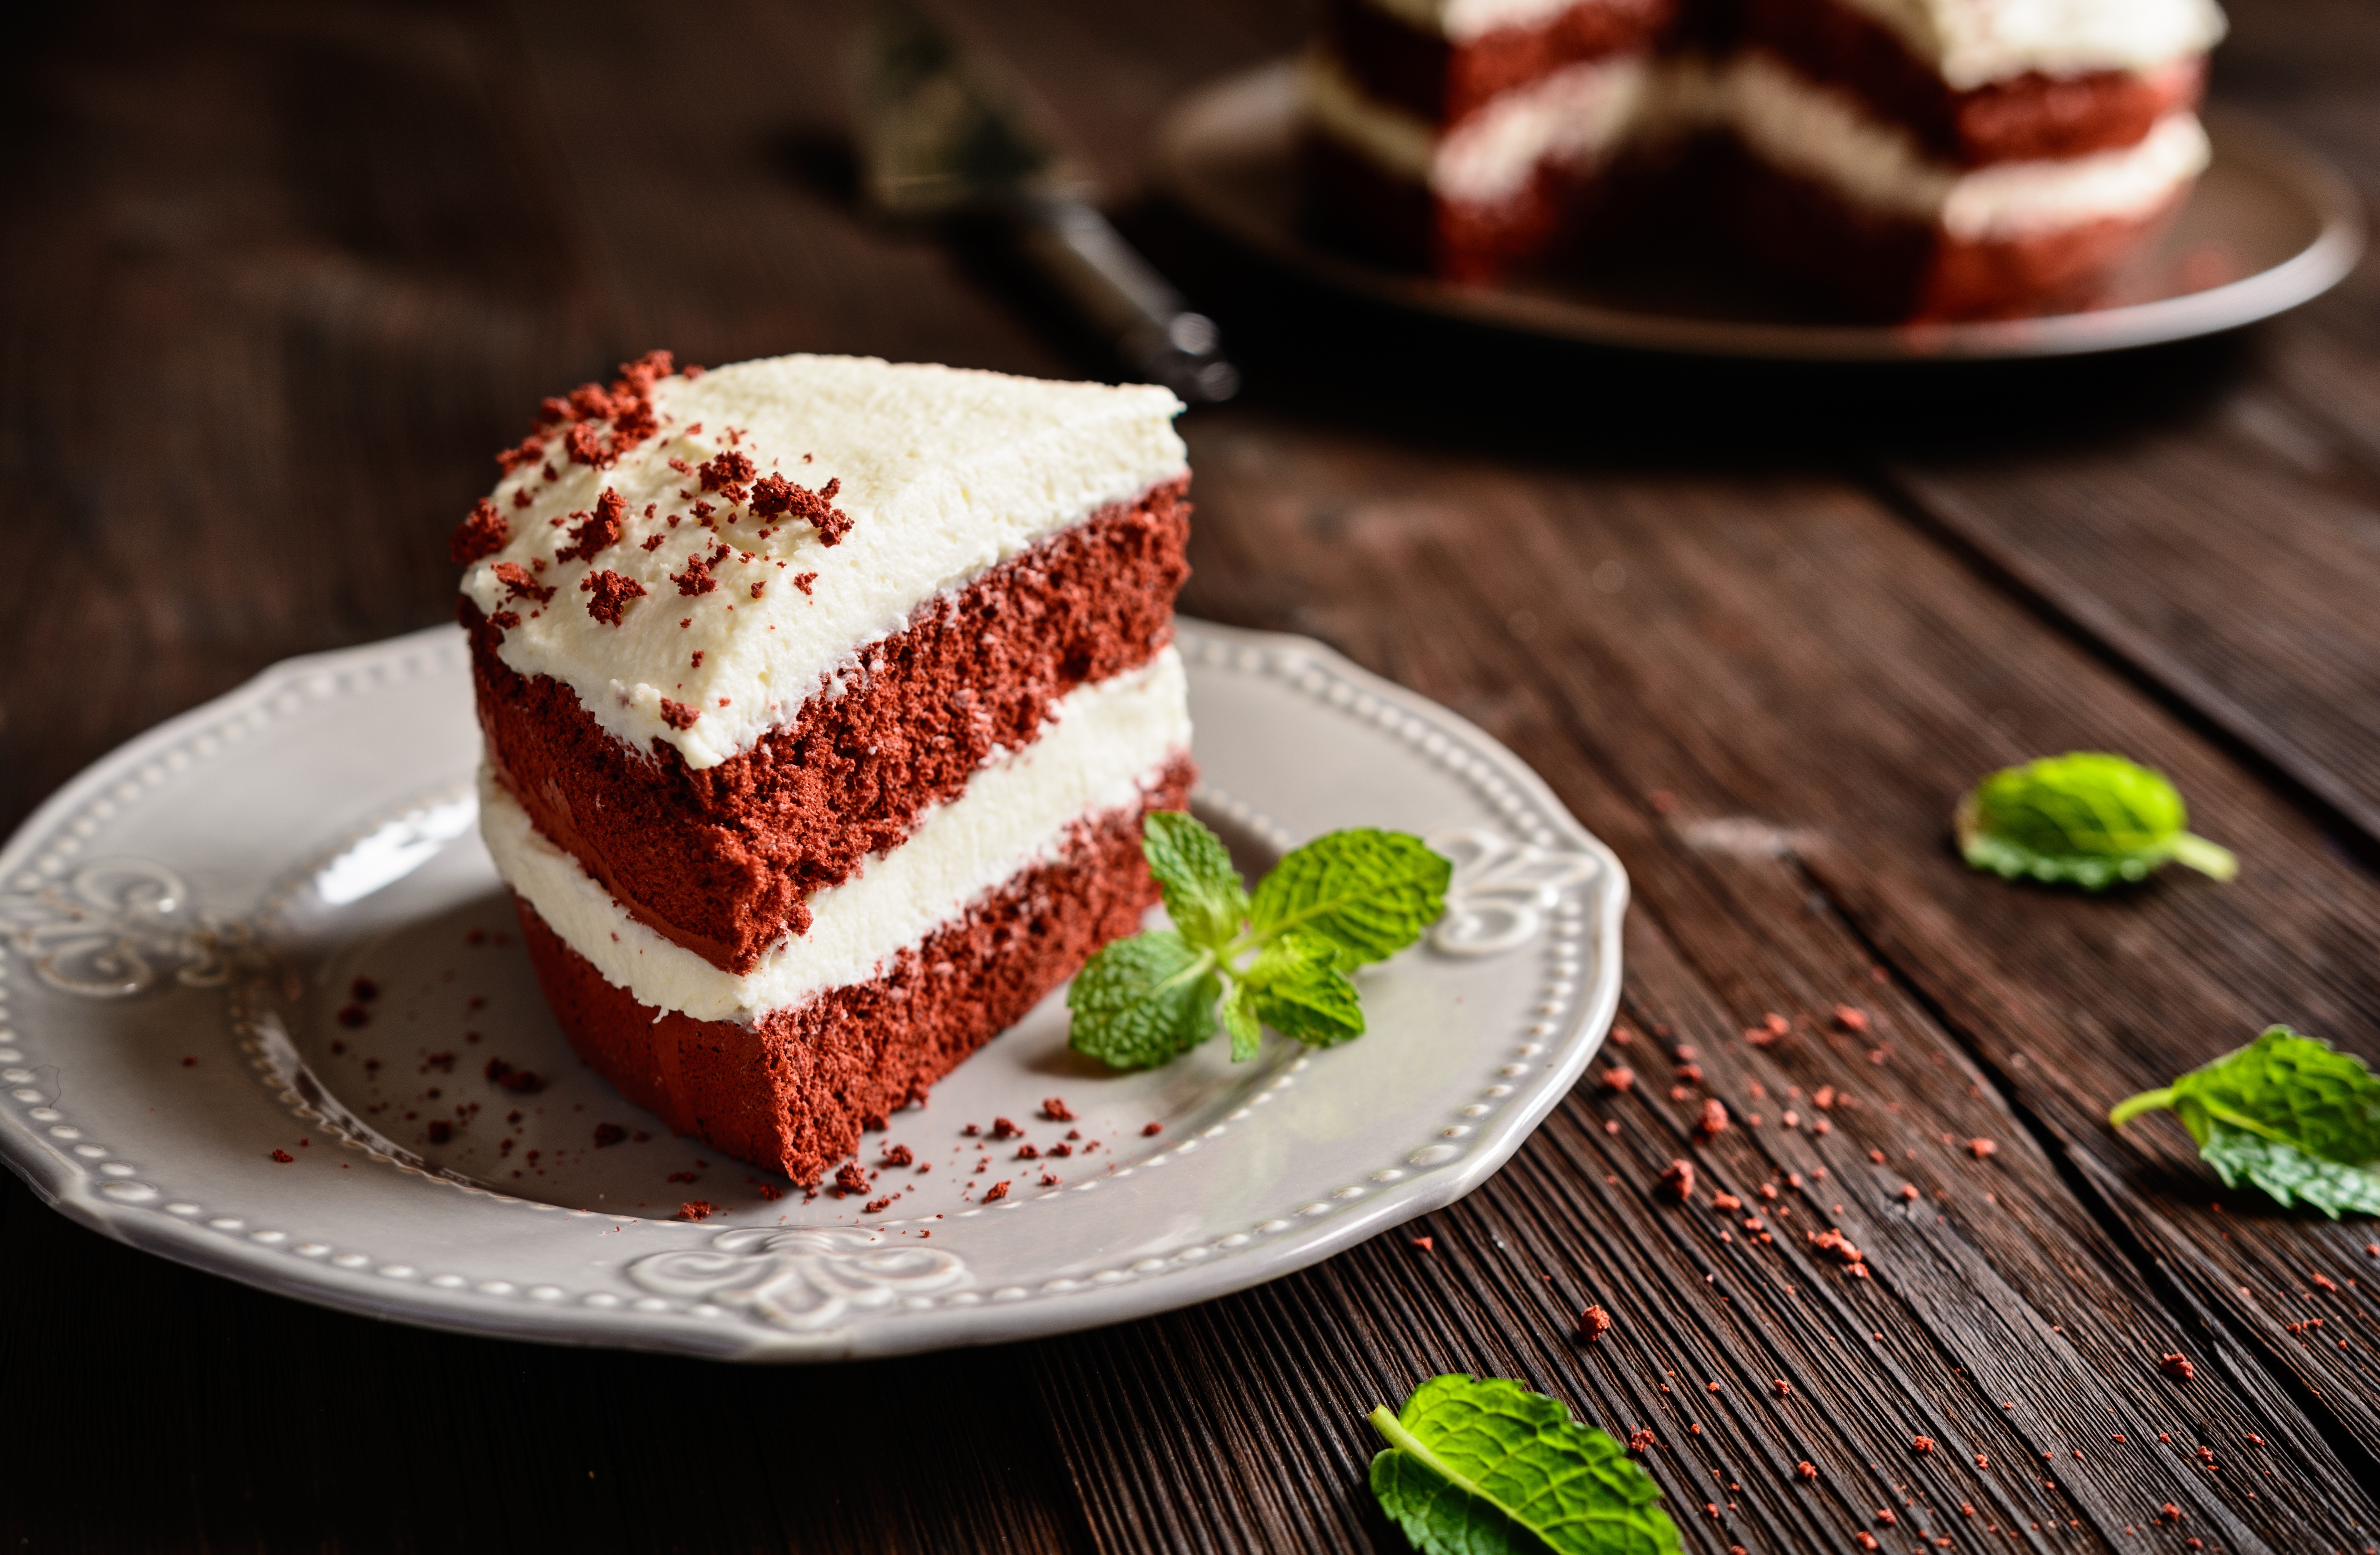 Cakes wallpaper - Photography wallpapers - #46028